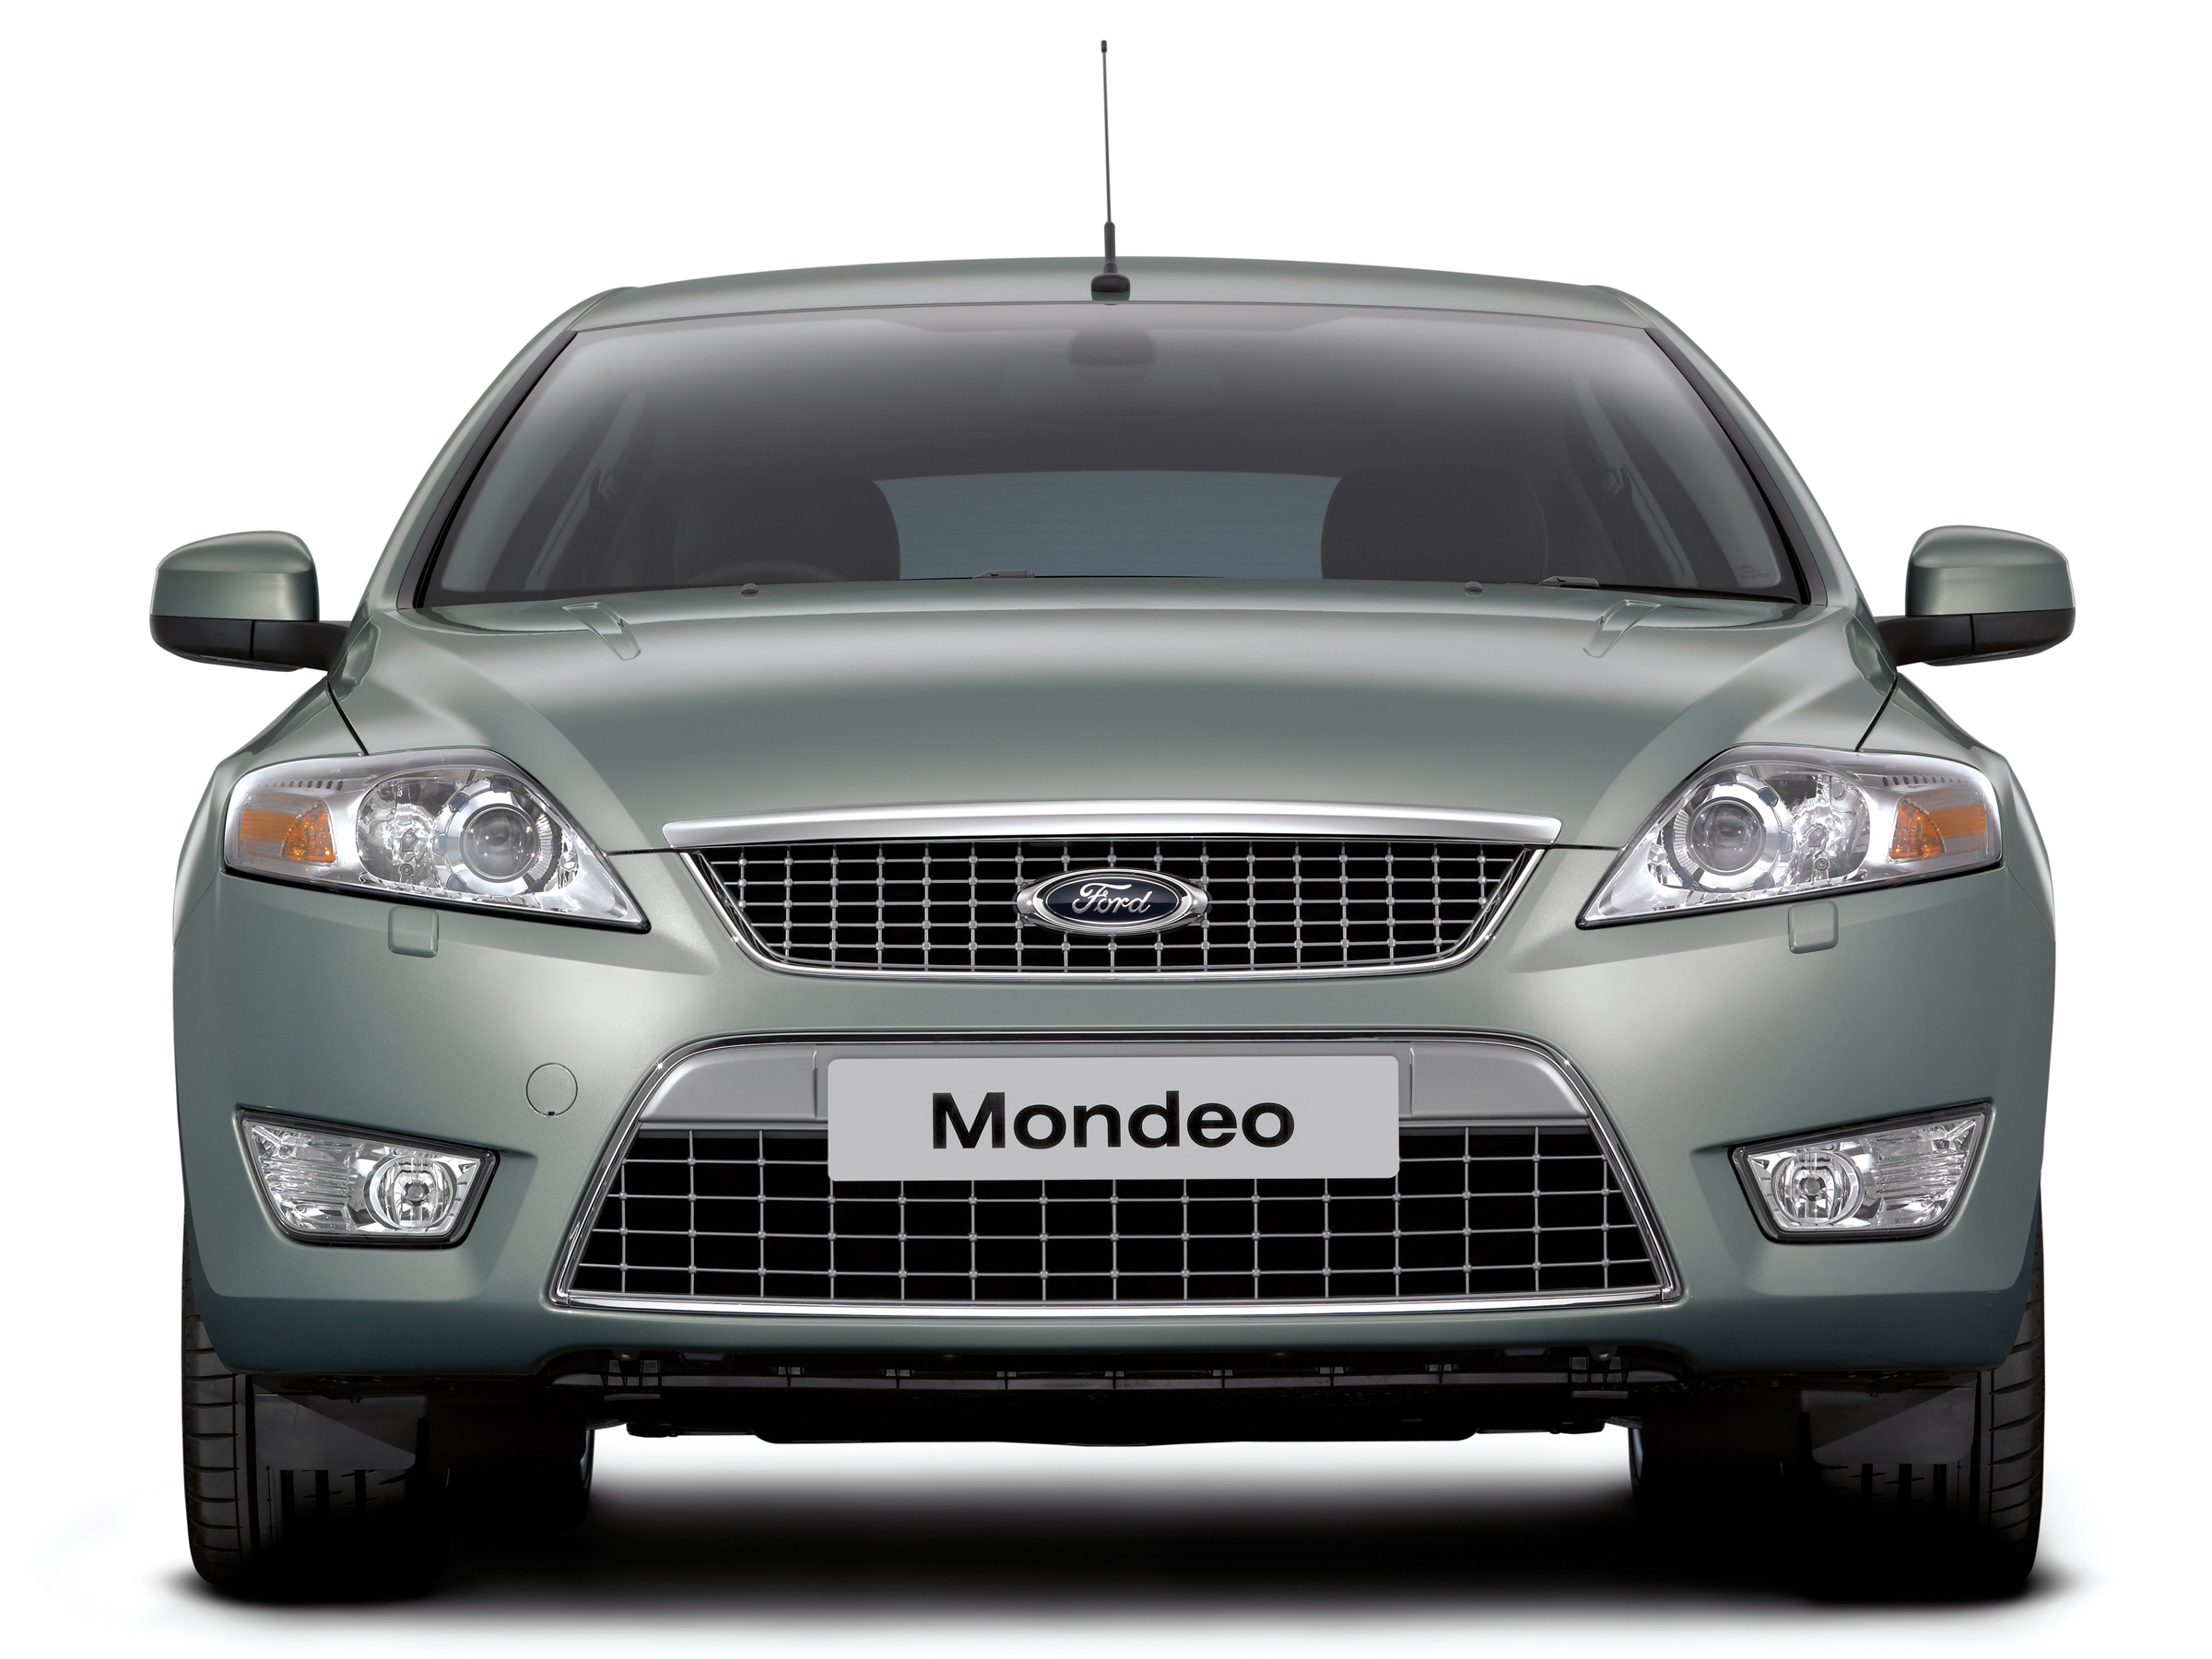 Ford Mondeo 4 2014. Машина Форд Мондео 4. Ford Mondeo 4 2007. Форд Мондео 2007.